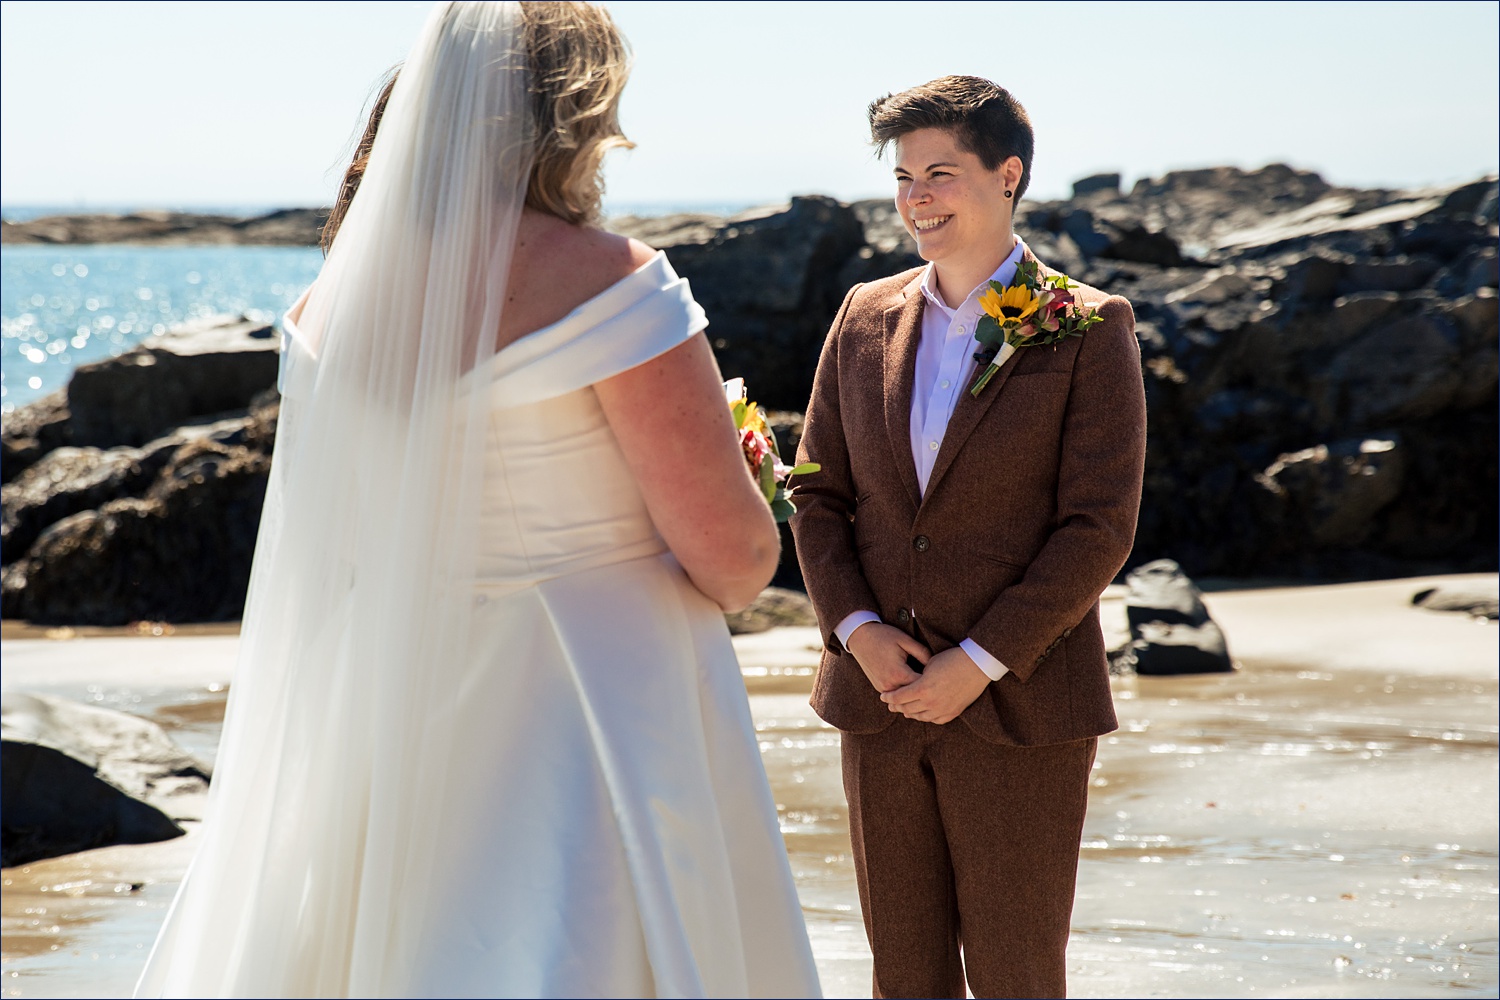 The small ceremony on the beach of Ogunquit Maine